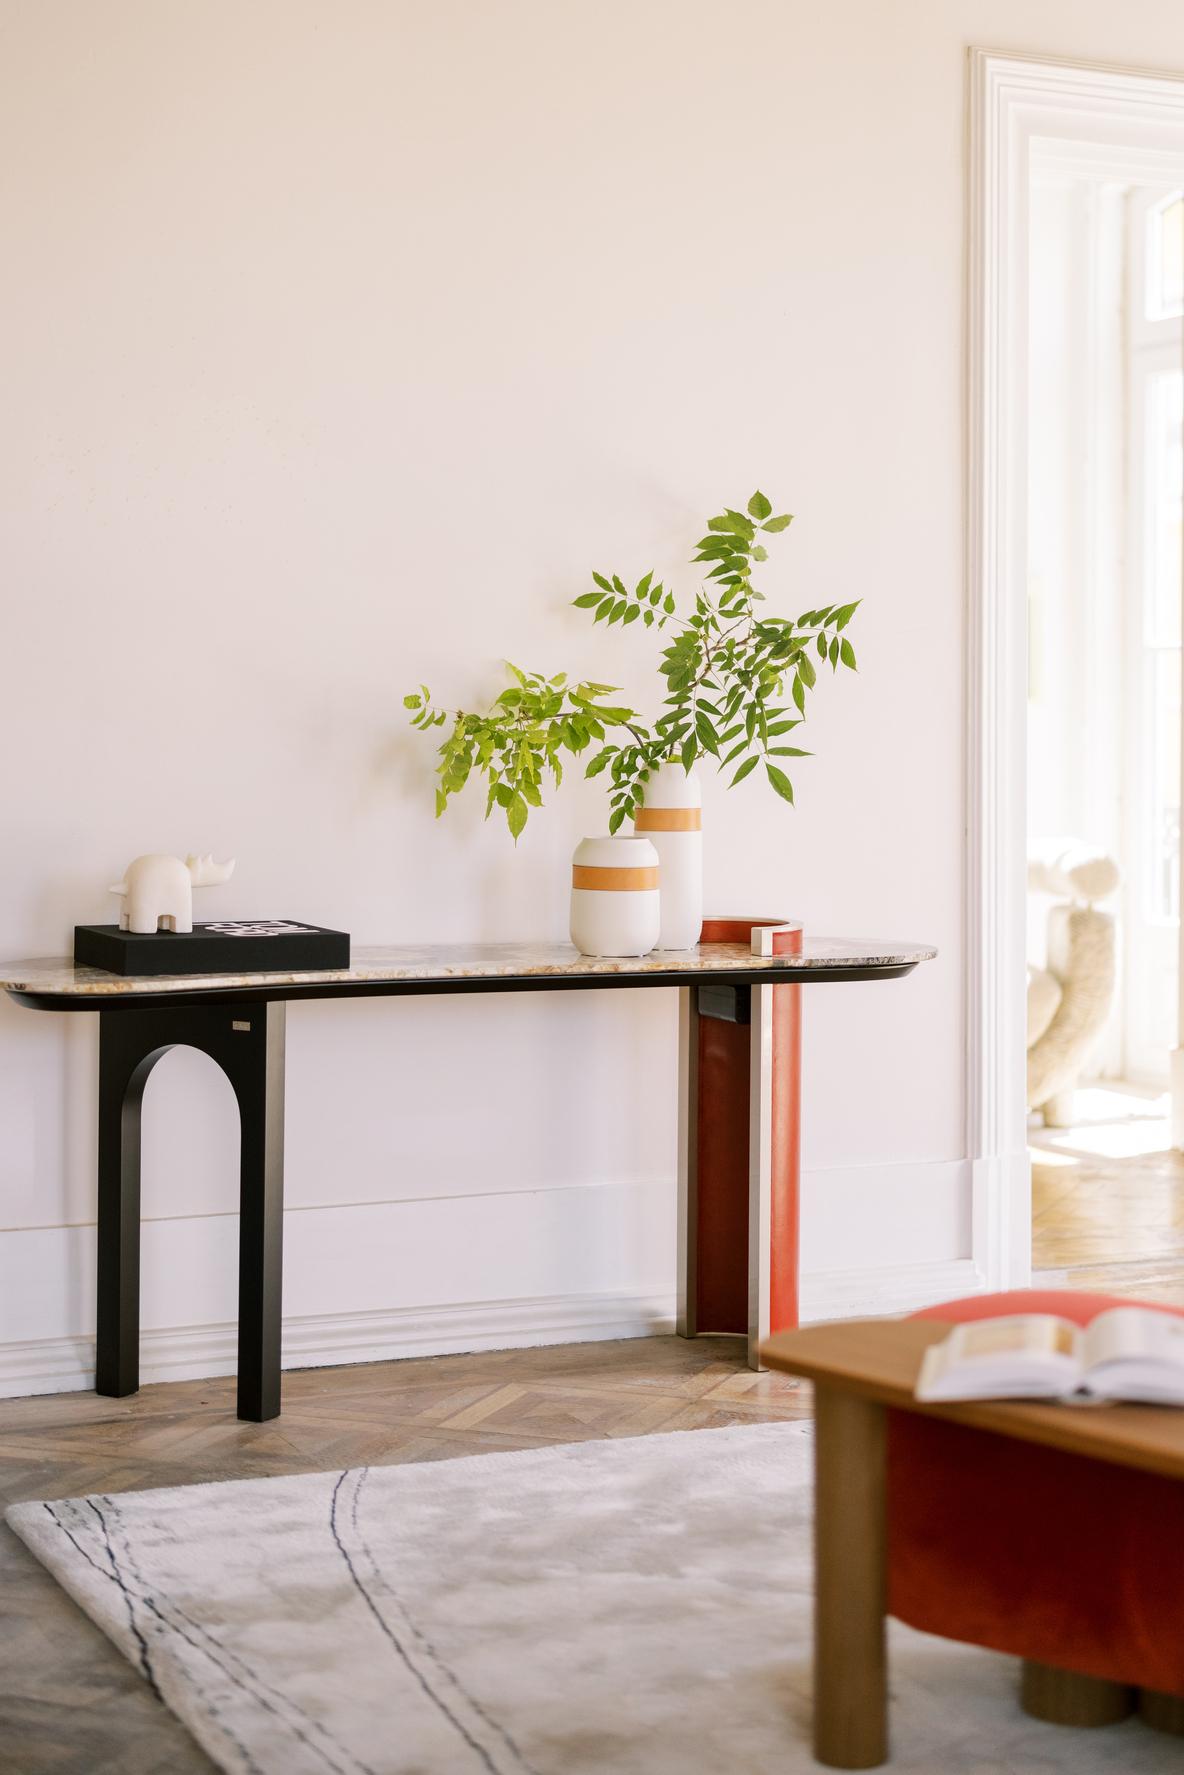 Chiado Console, Contemporary Collection, Handcrafted in Portugal - Europe by Greenapple.

The Chiado console table honors Lisbon’s historic quarter, capturing the essence of its artistic life and bohemian nights. Designed to seamlessly blend